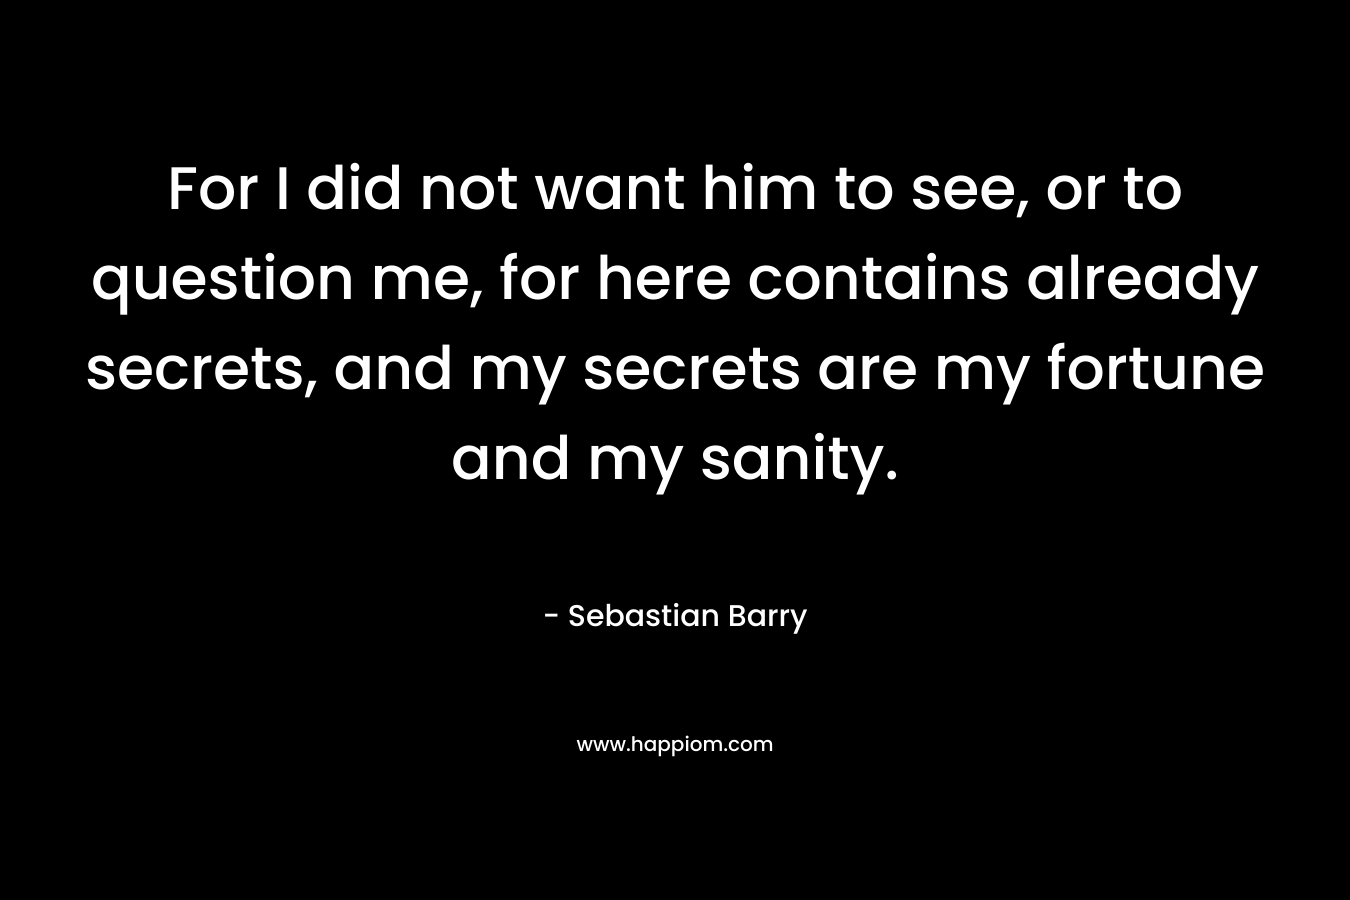 For I did not want him to see, or to question me, for here contains already secrets, and my secrets are my fortune and my sanity. – Sebastian Barry